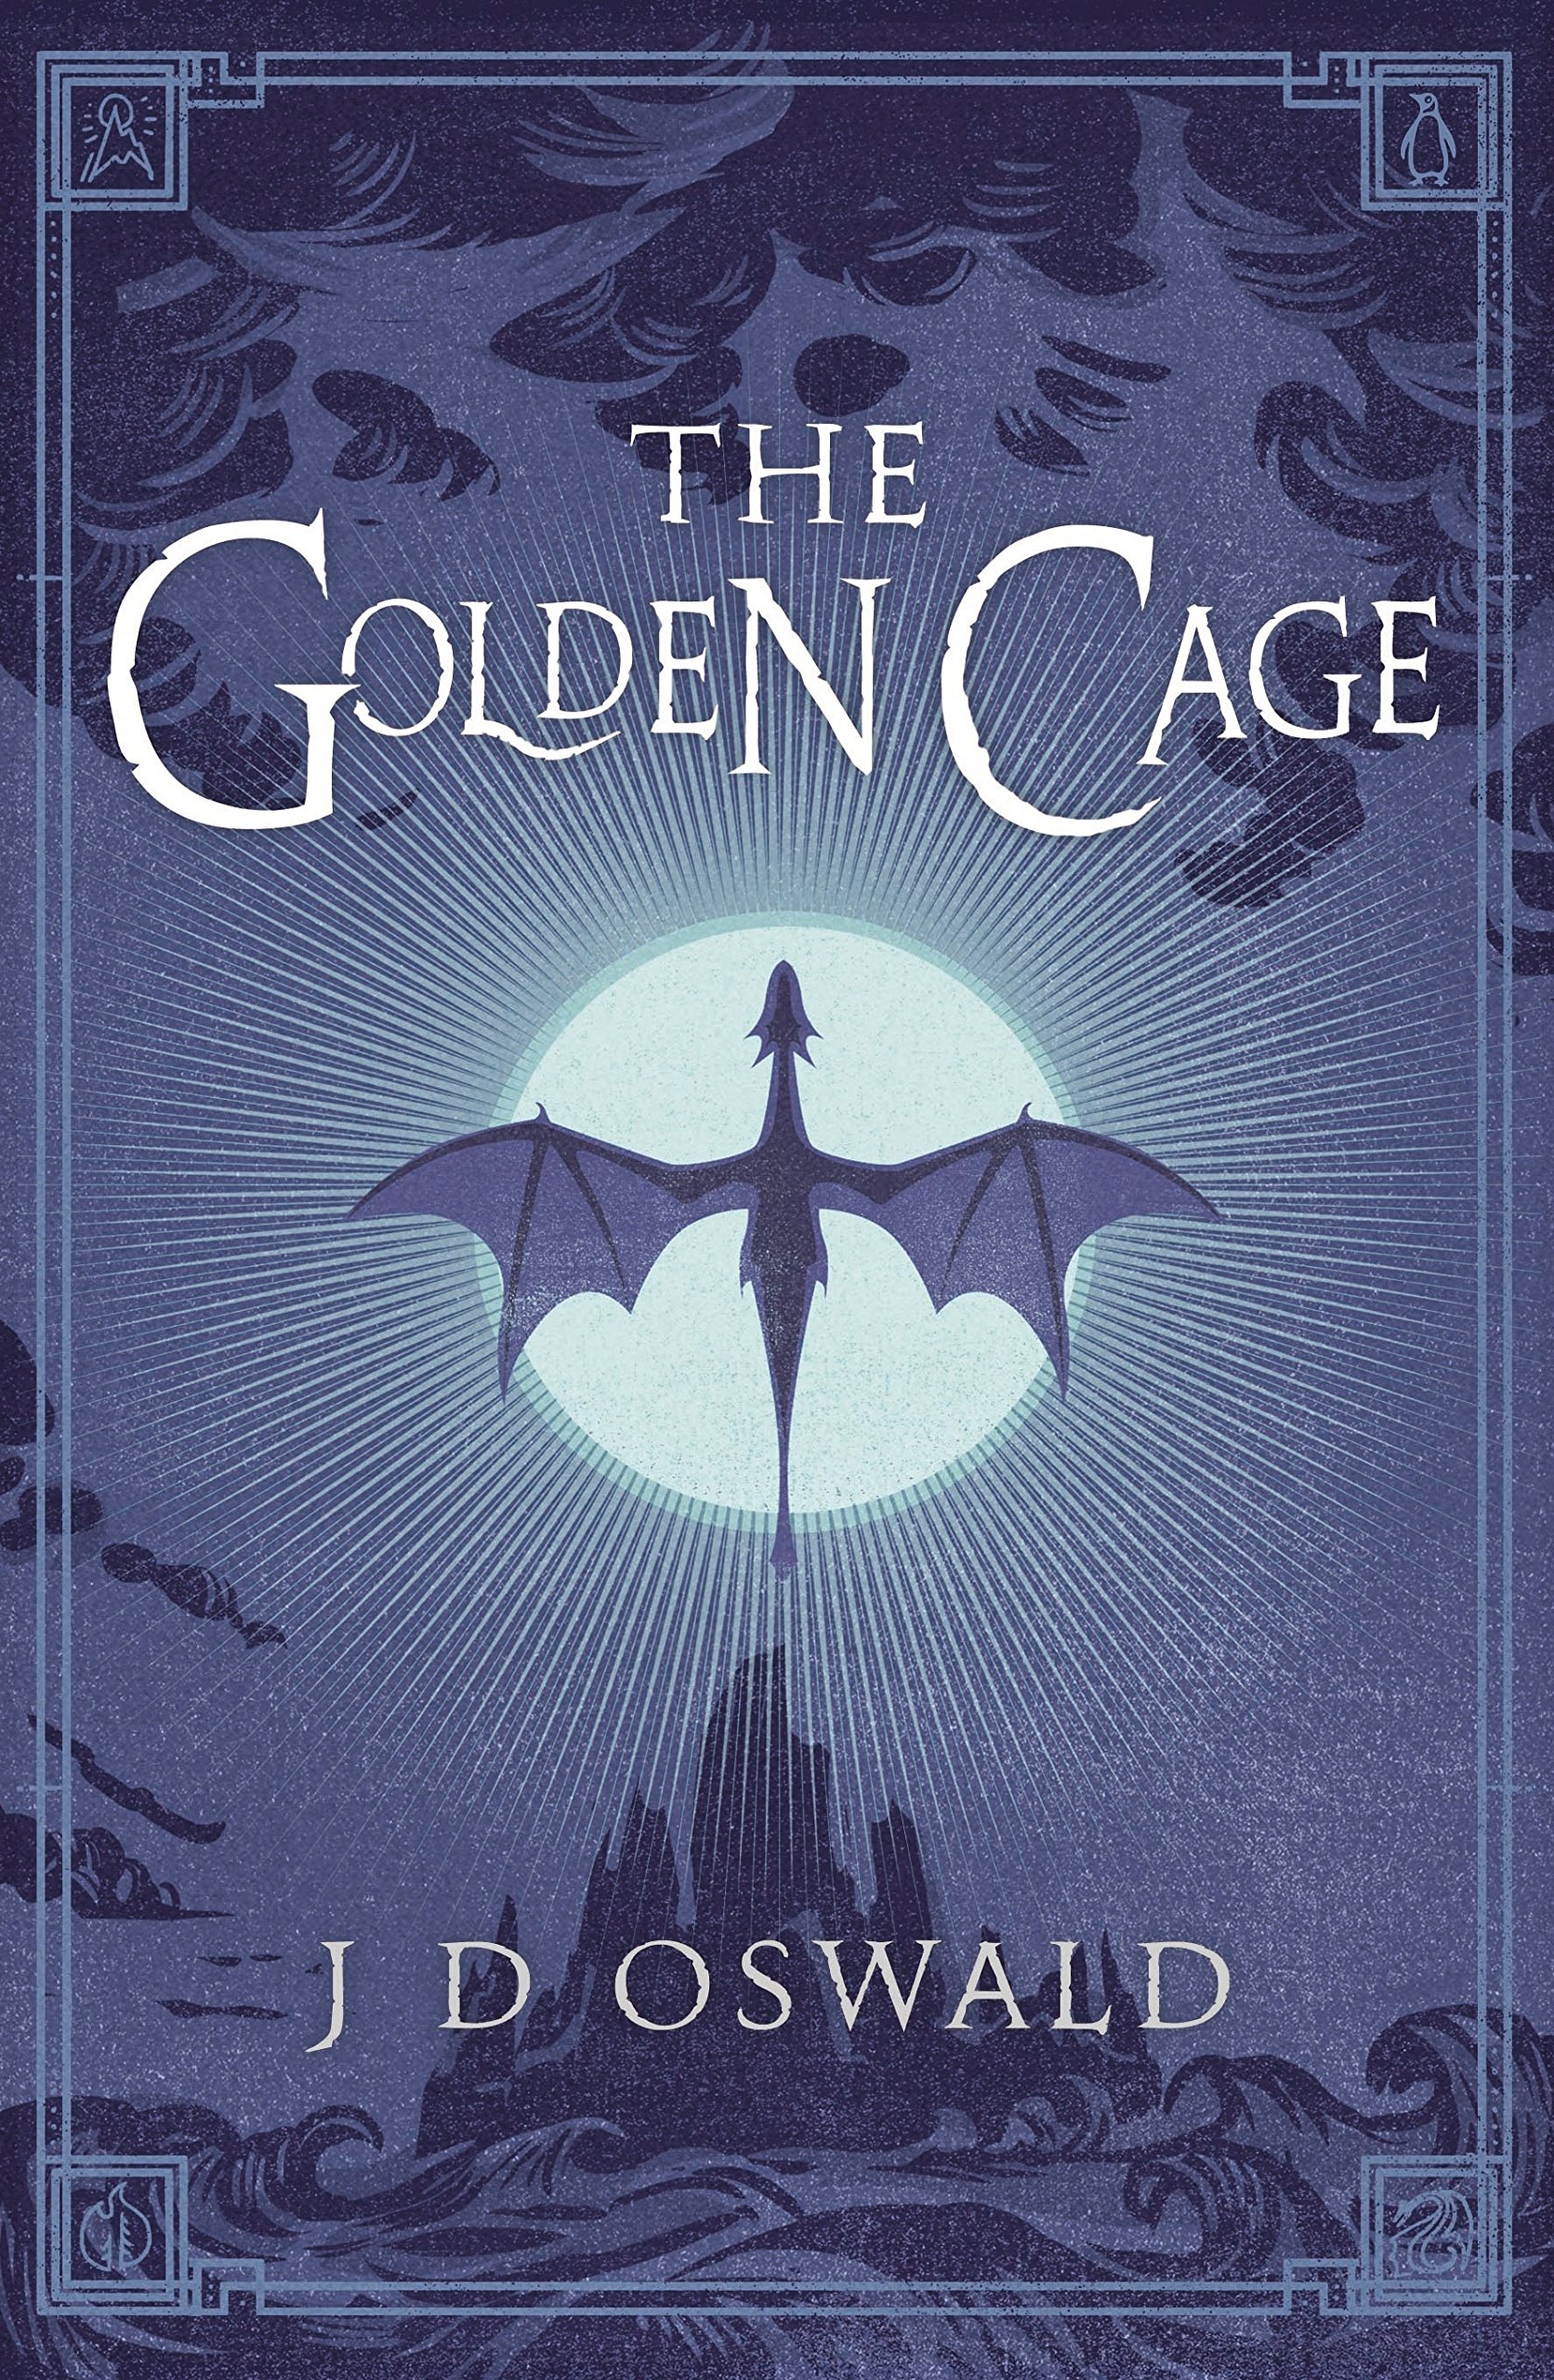 The Golden Cage | J.D. Oswald